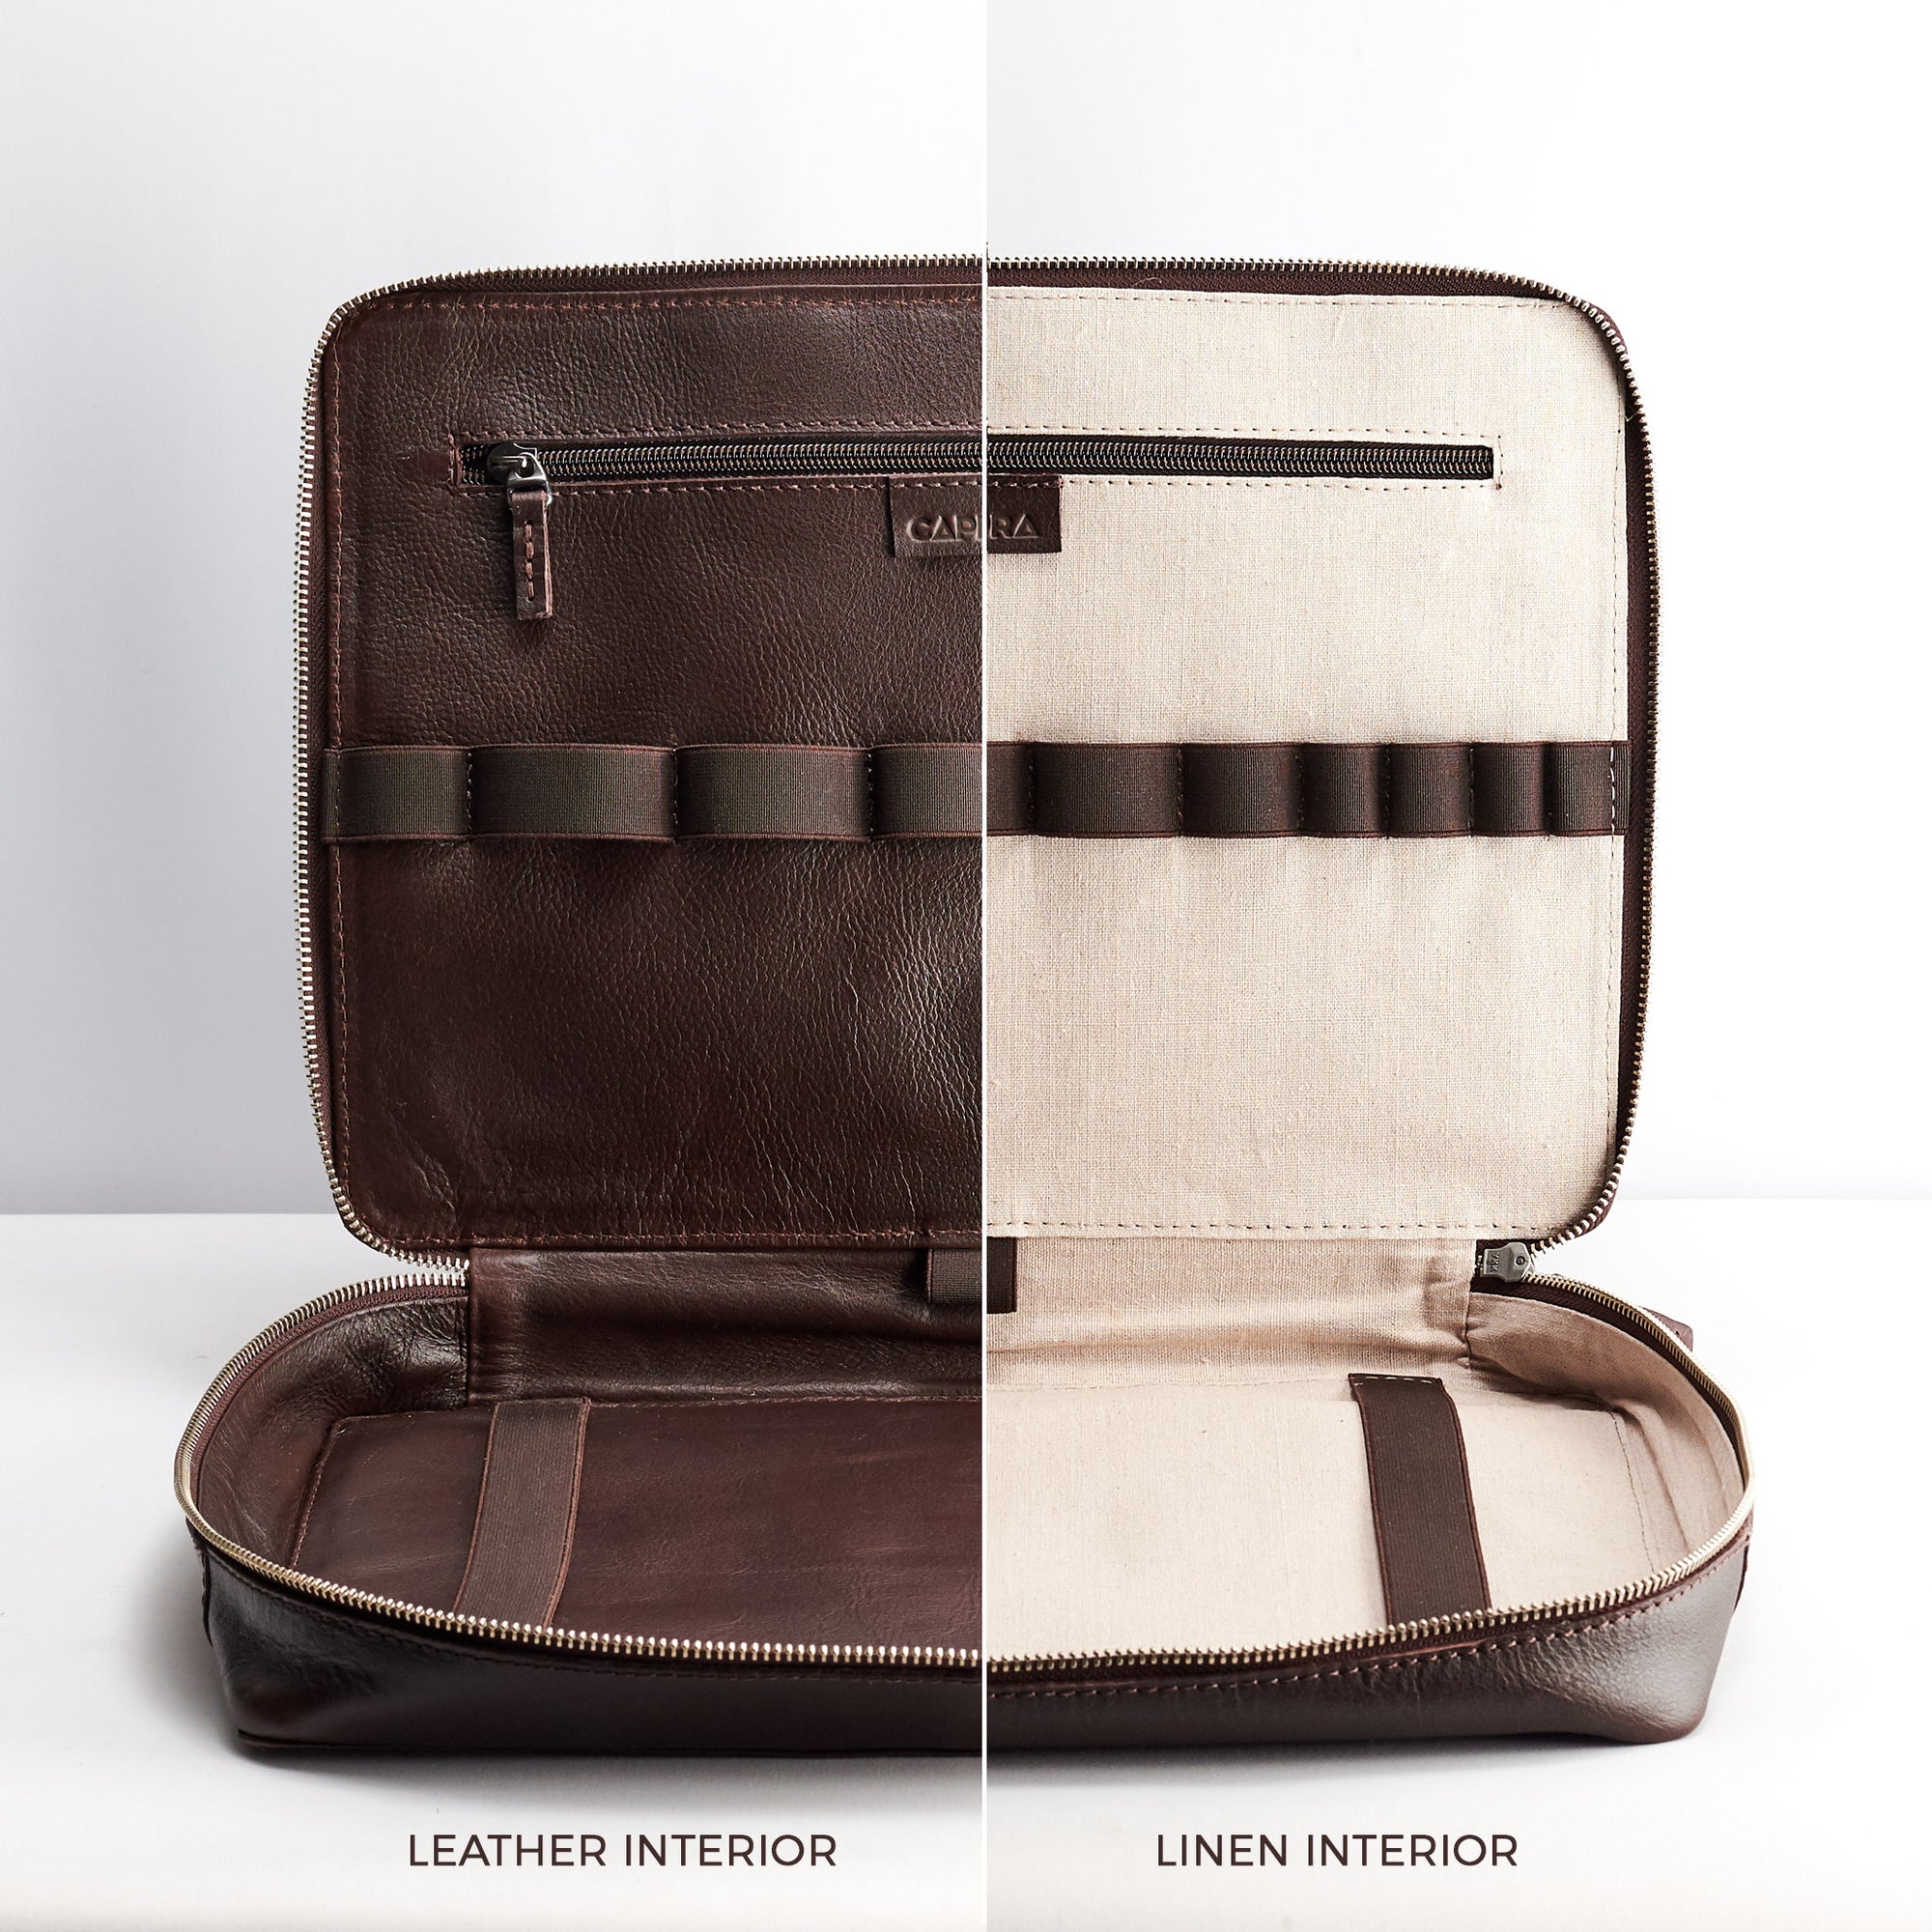 Handmade gear bag with leather interior. Dark brown tech organizer travel by Capra Leather. Fits laptop 15 inch